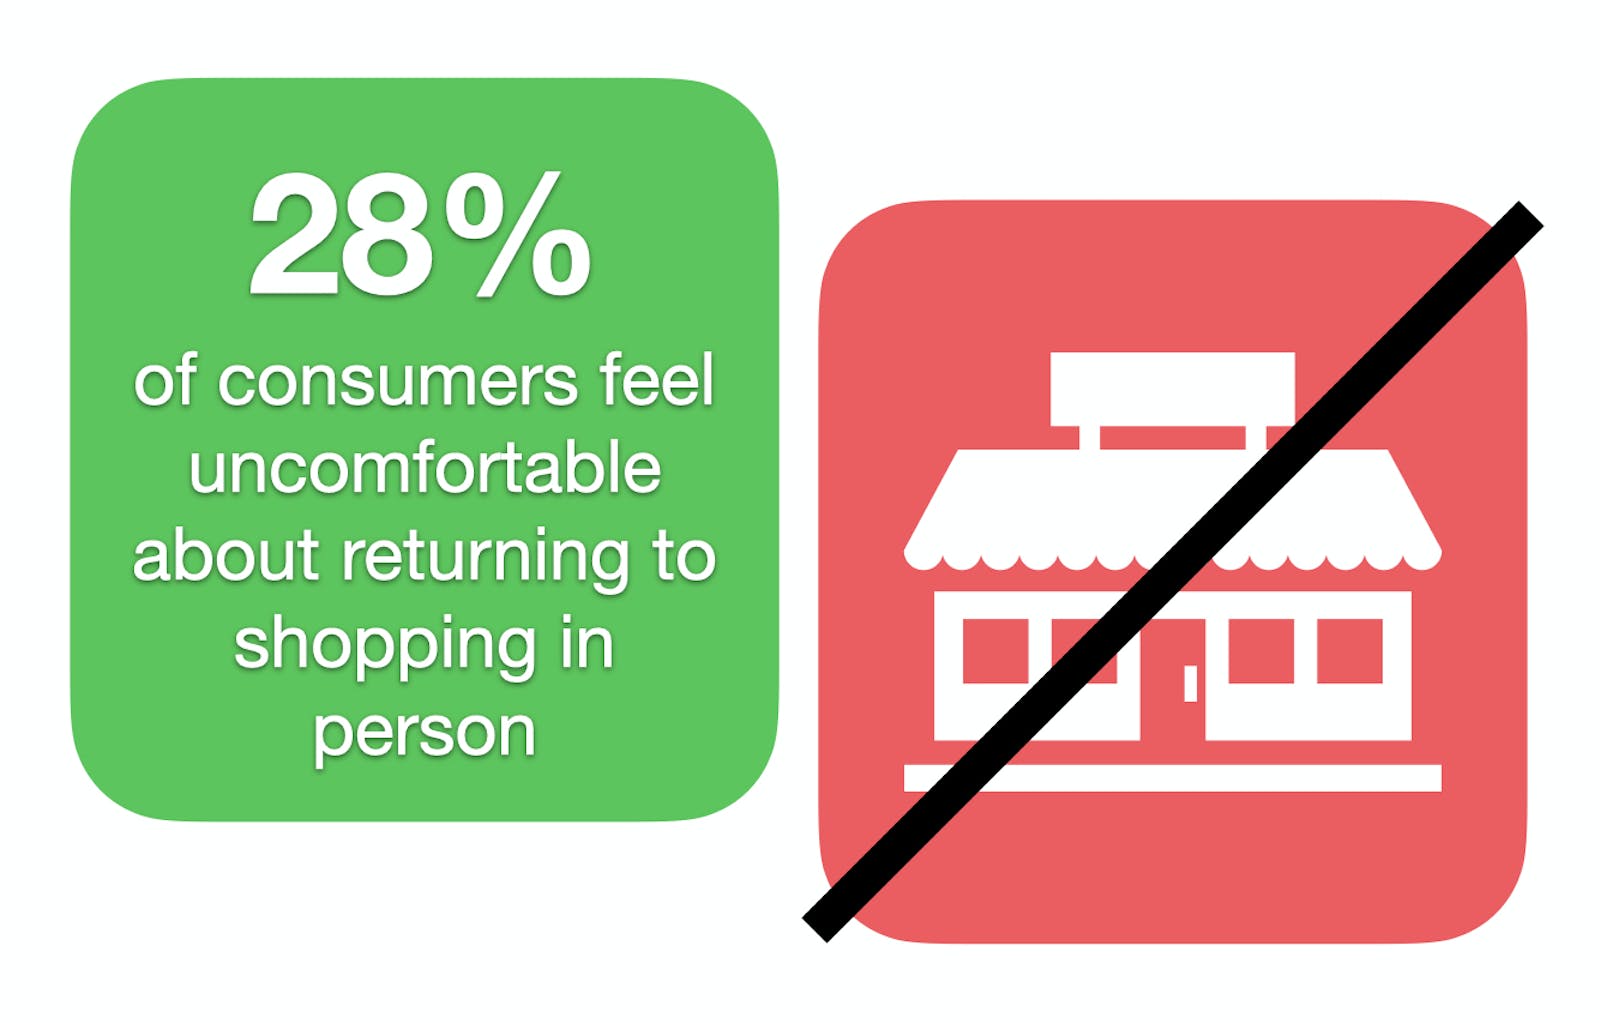 30% of shoppers who say they are uncomfortable visiting physical stores